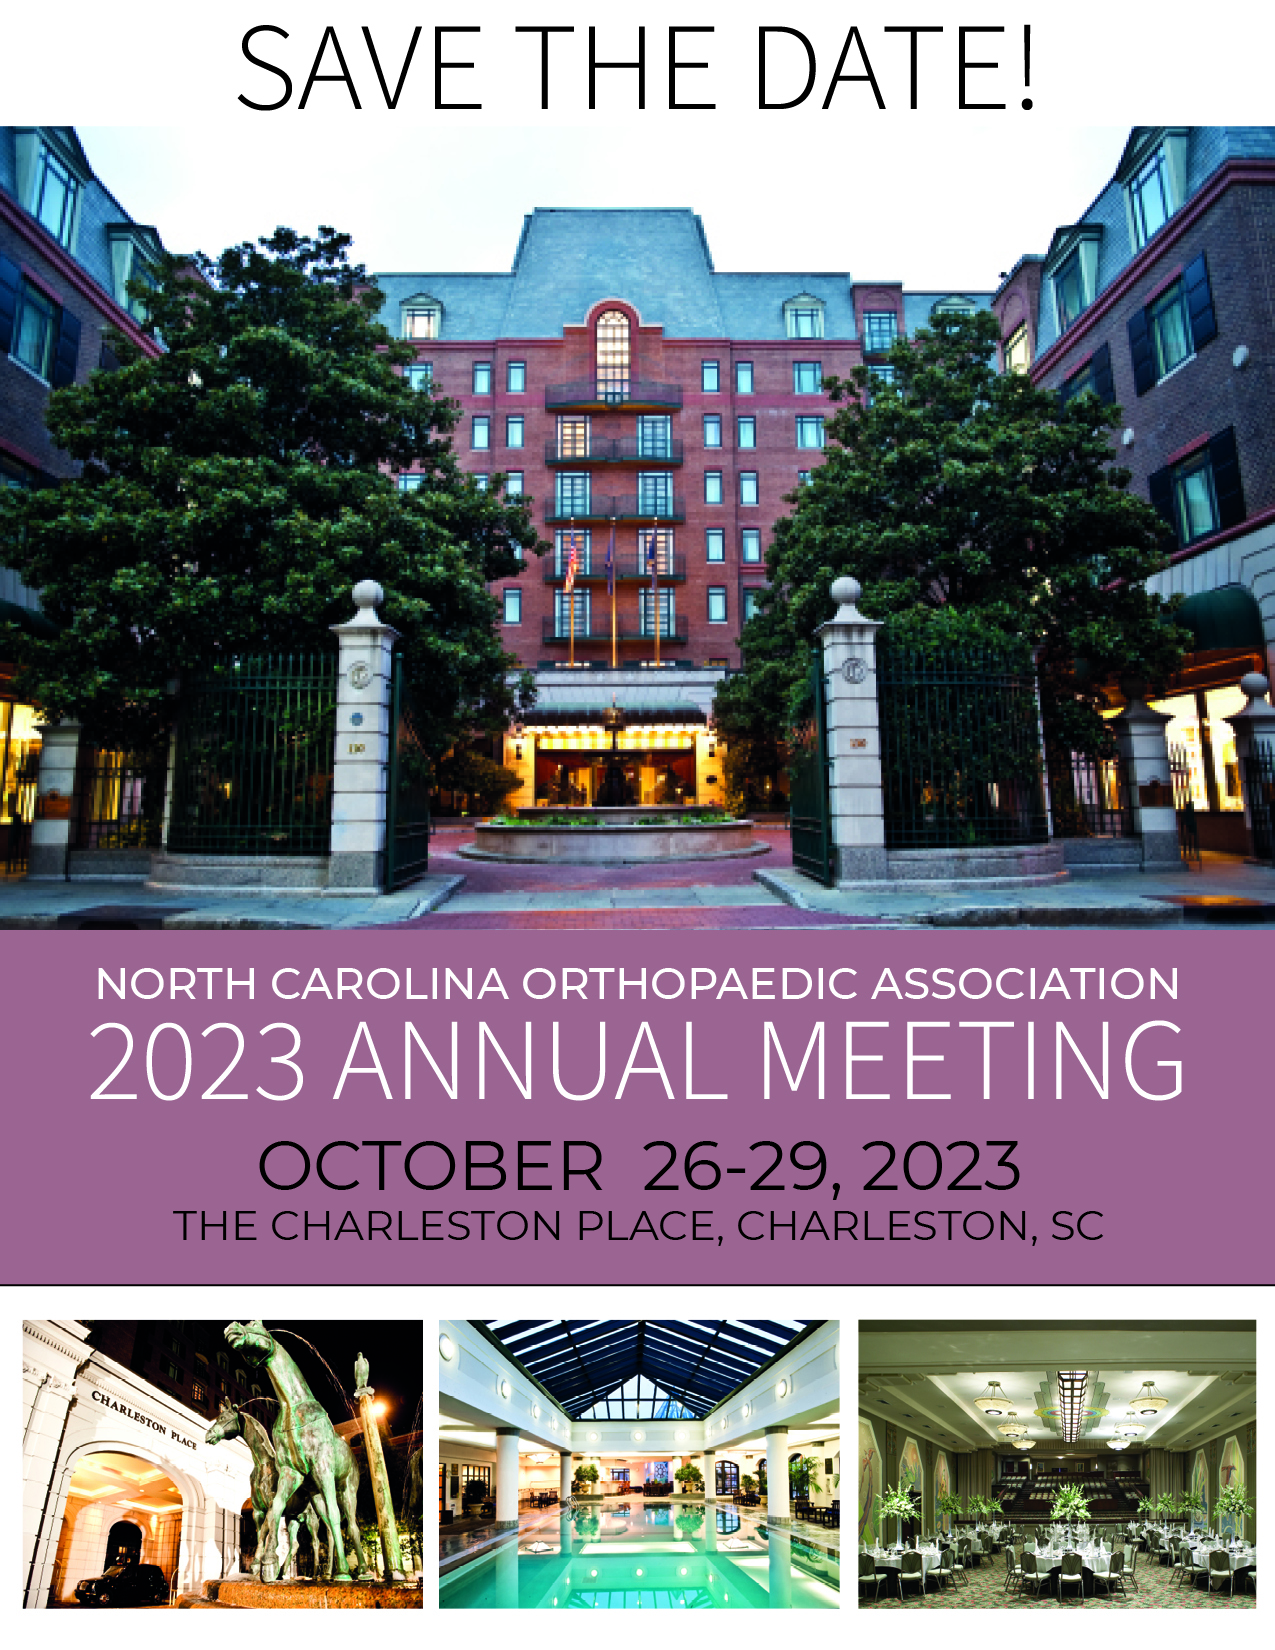 2023 NCOA Save the Date - Charleston Place